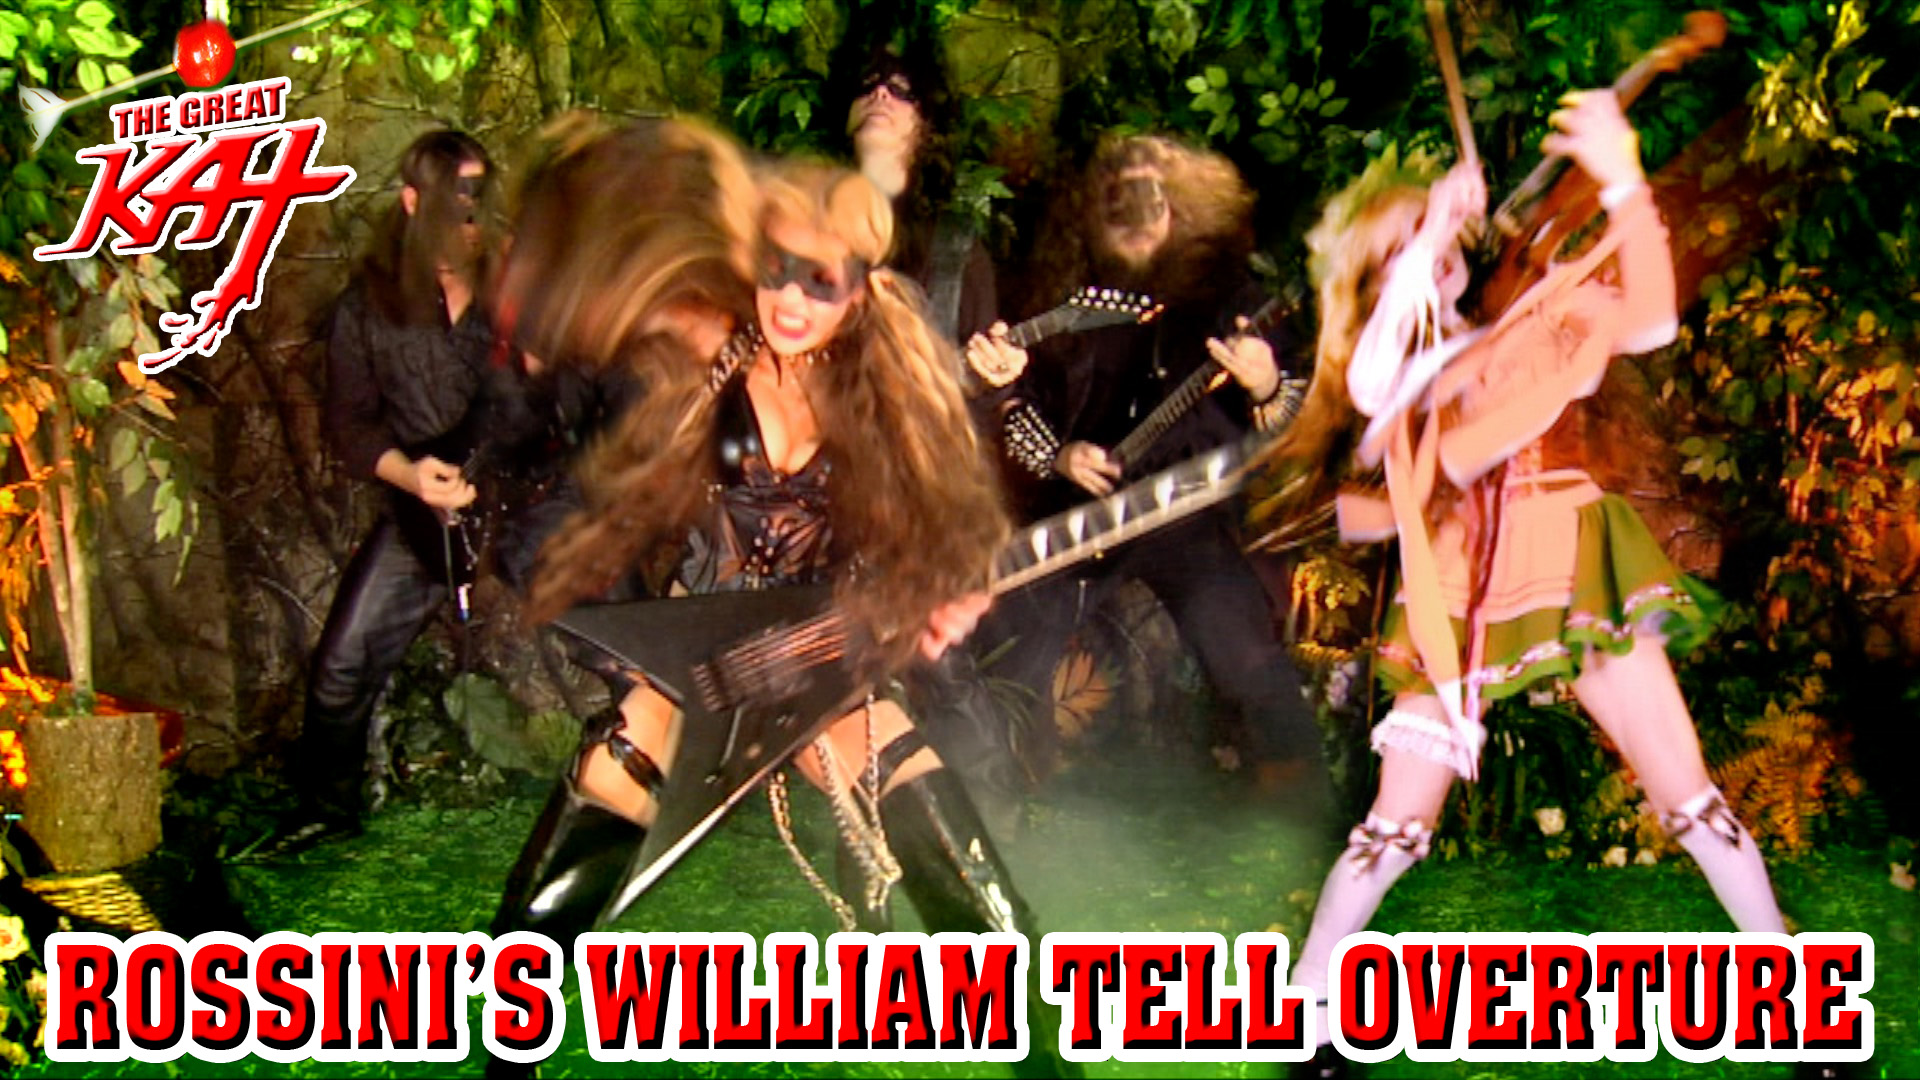 HI-YO SILVER!! WATCH FREE on AMAZON PRIME ROSSINI'S "WILLIAM TELL OVERTURE" - MUSIC VIDEO FROM THE GREAT KAT'S Upcoming DVD!  Free on Amazon Prime: https://www.amazon.com/Great-Kat-William-Tell-Overture/dp/B01MA3QE40/ "WILLIAM TELL OVERTURE" ("LONE RANGER" Theme Song) MUSIC VIDEO brings the Legend of William Tell to life, starring THE GREAT KAT, the LONE SHREDDER, performing VIRTUOSO SHRED Guitar AND Violin and conducting her HOT ALL-MALE BAND! WATCH FREE on AMAZON PRIME at https://www.amazon.com/Great-Kat-William-Tell-Overture/dp/B01MA3QE40/ 